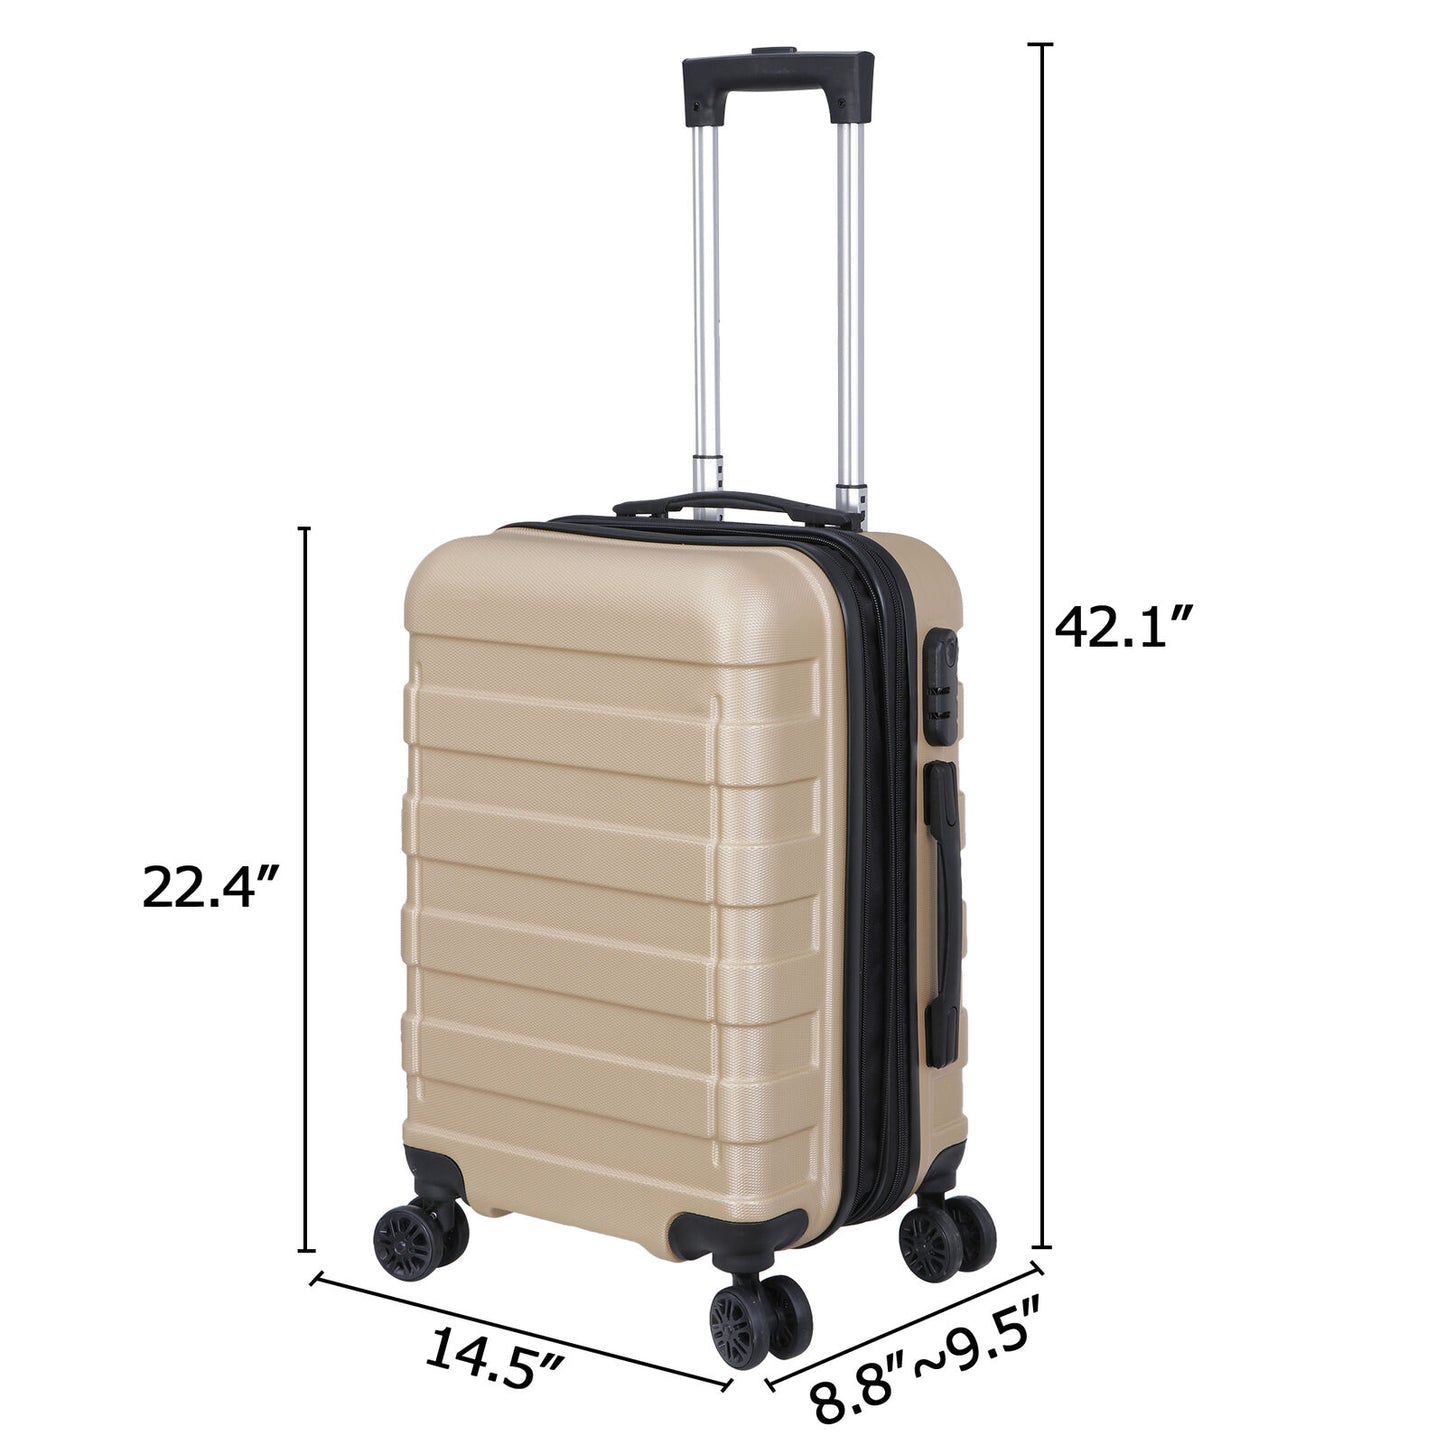 21"Champagne Carry On Luggage Suitcase Expandable Hardside Spinner With 4 Wheels